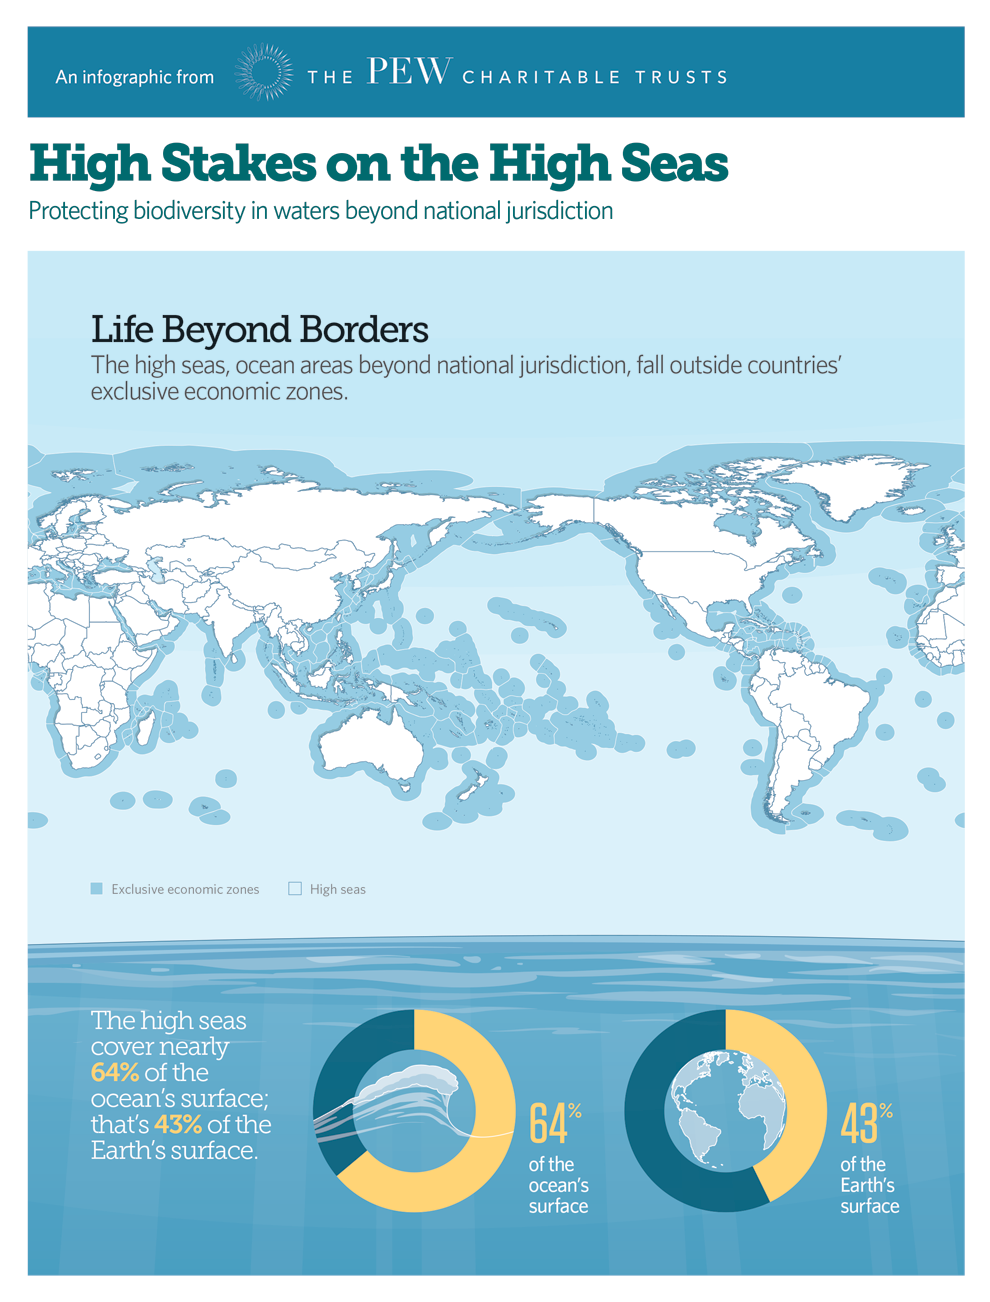 High Stakes on the High Seas | The Pew Charitable Trusts